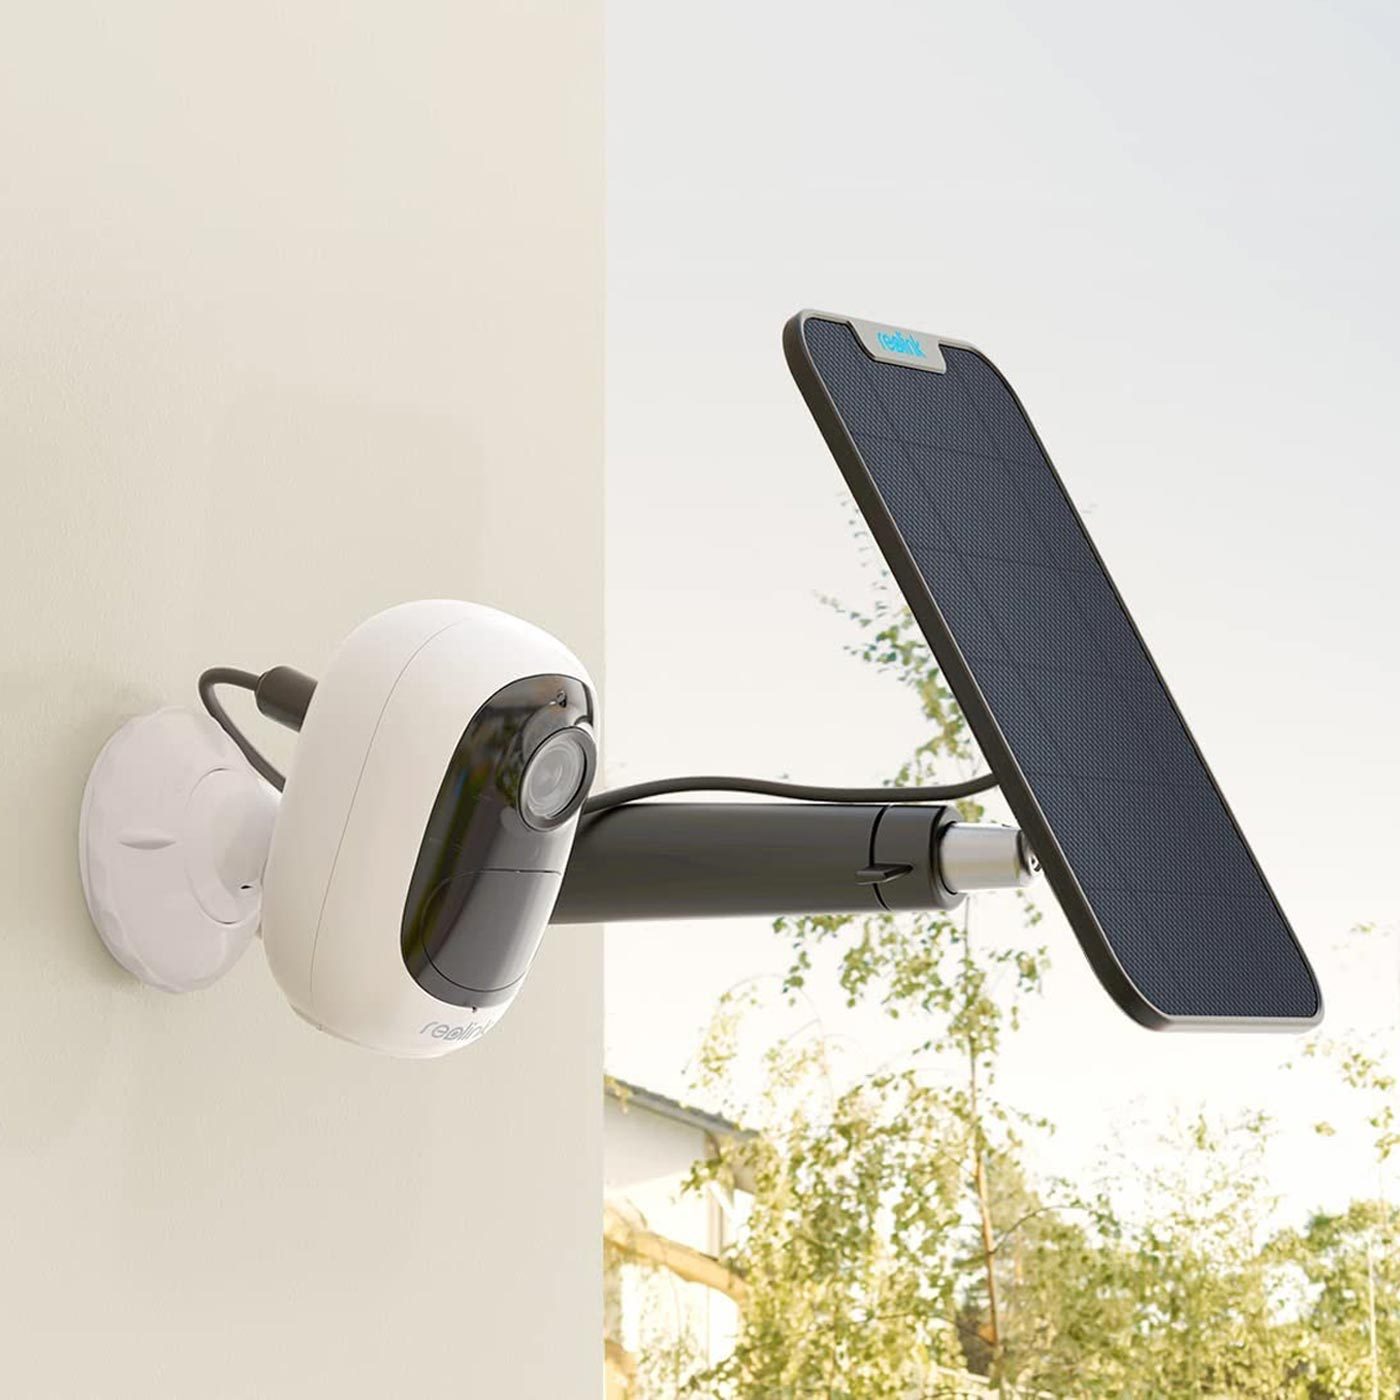 5 Best Outdoor Solar Security Cameras for Your Property